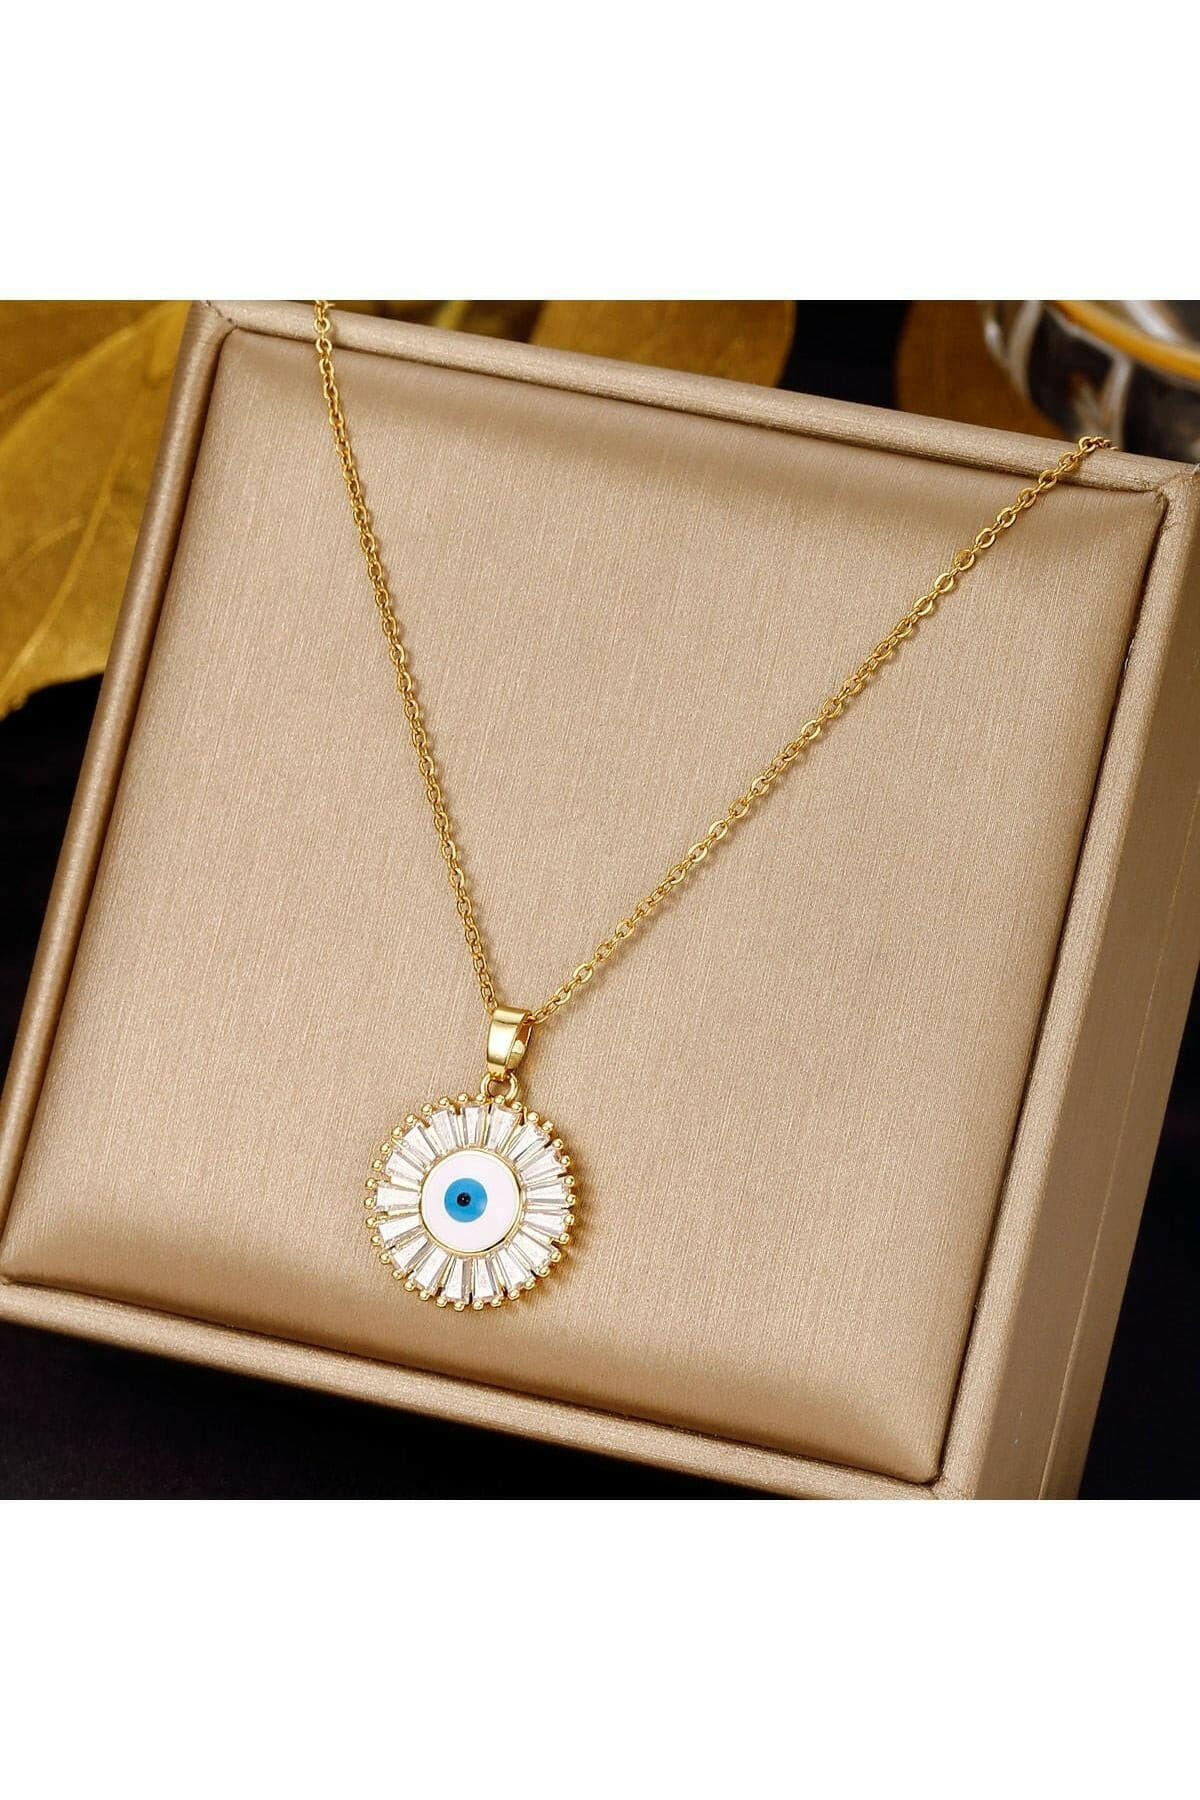 Stainless Steel Turkish Crystal Evil Eyes Pendant Necklace For Women.